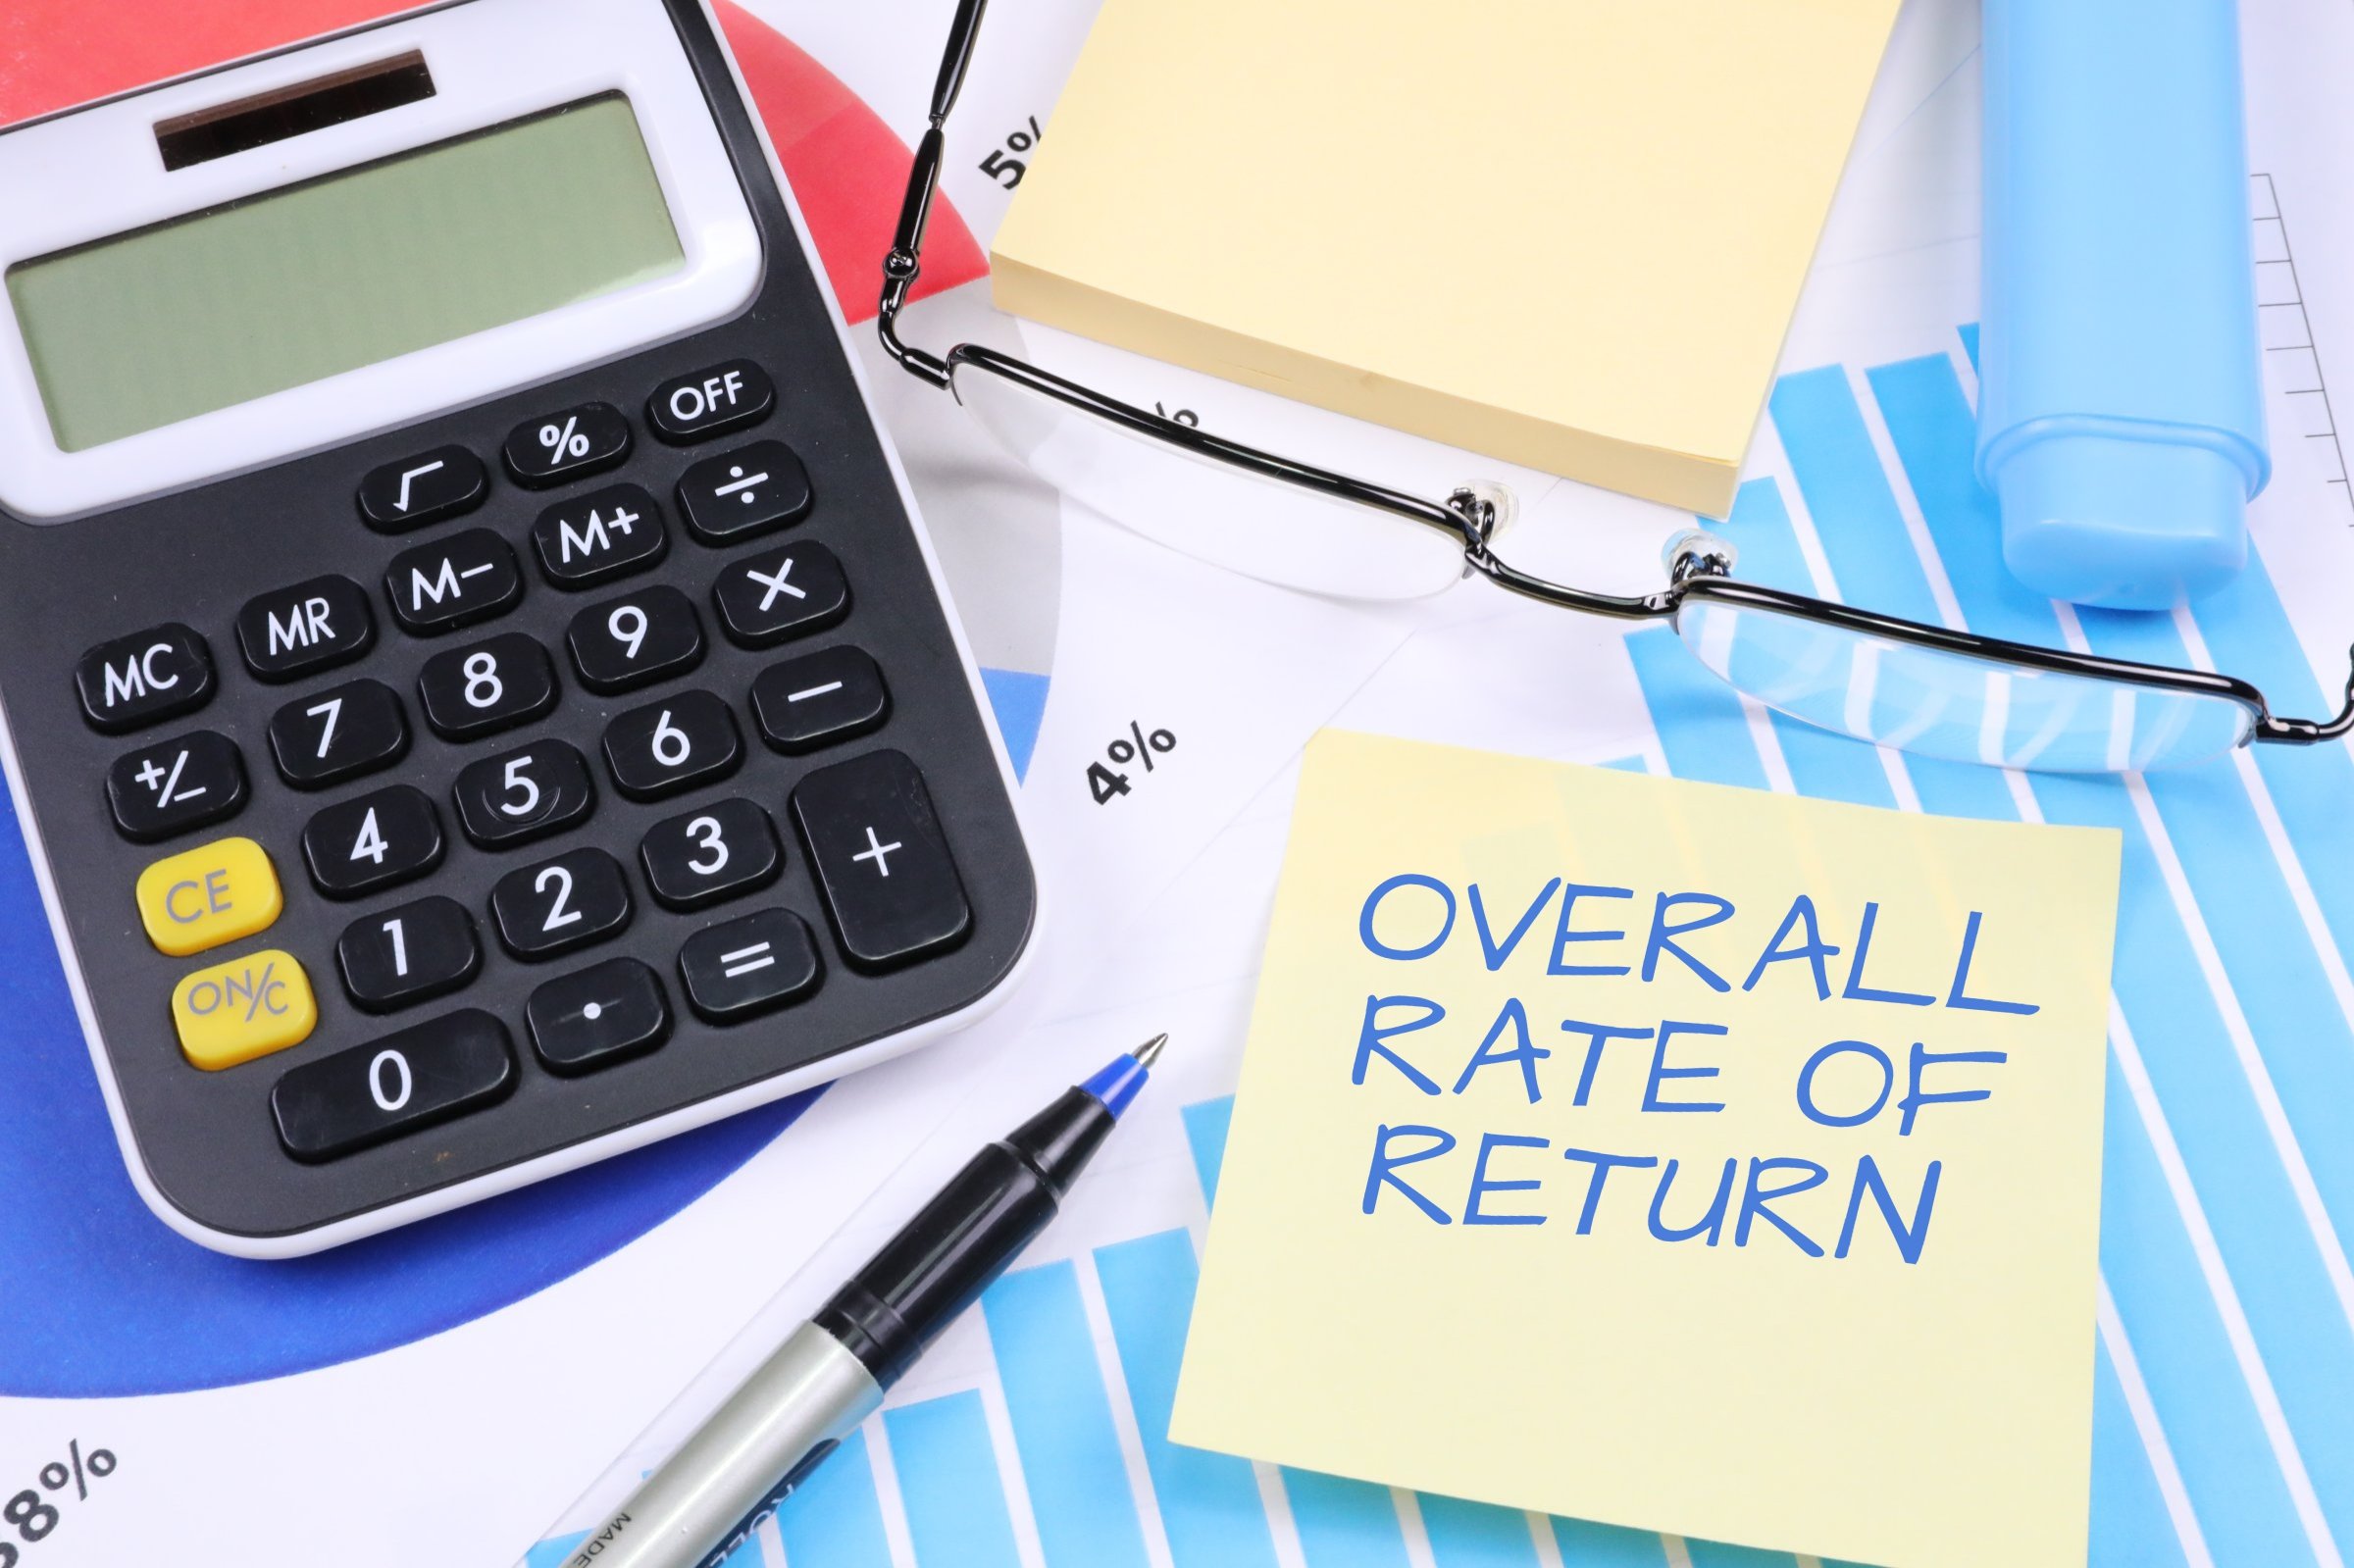 Overall Rate of Return